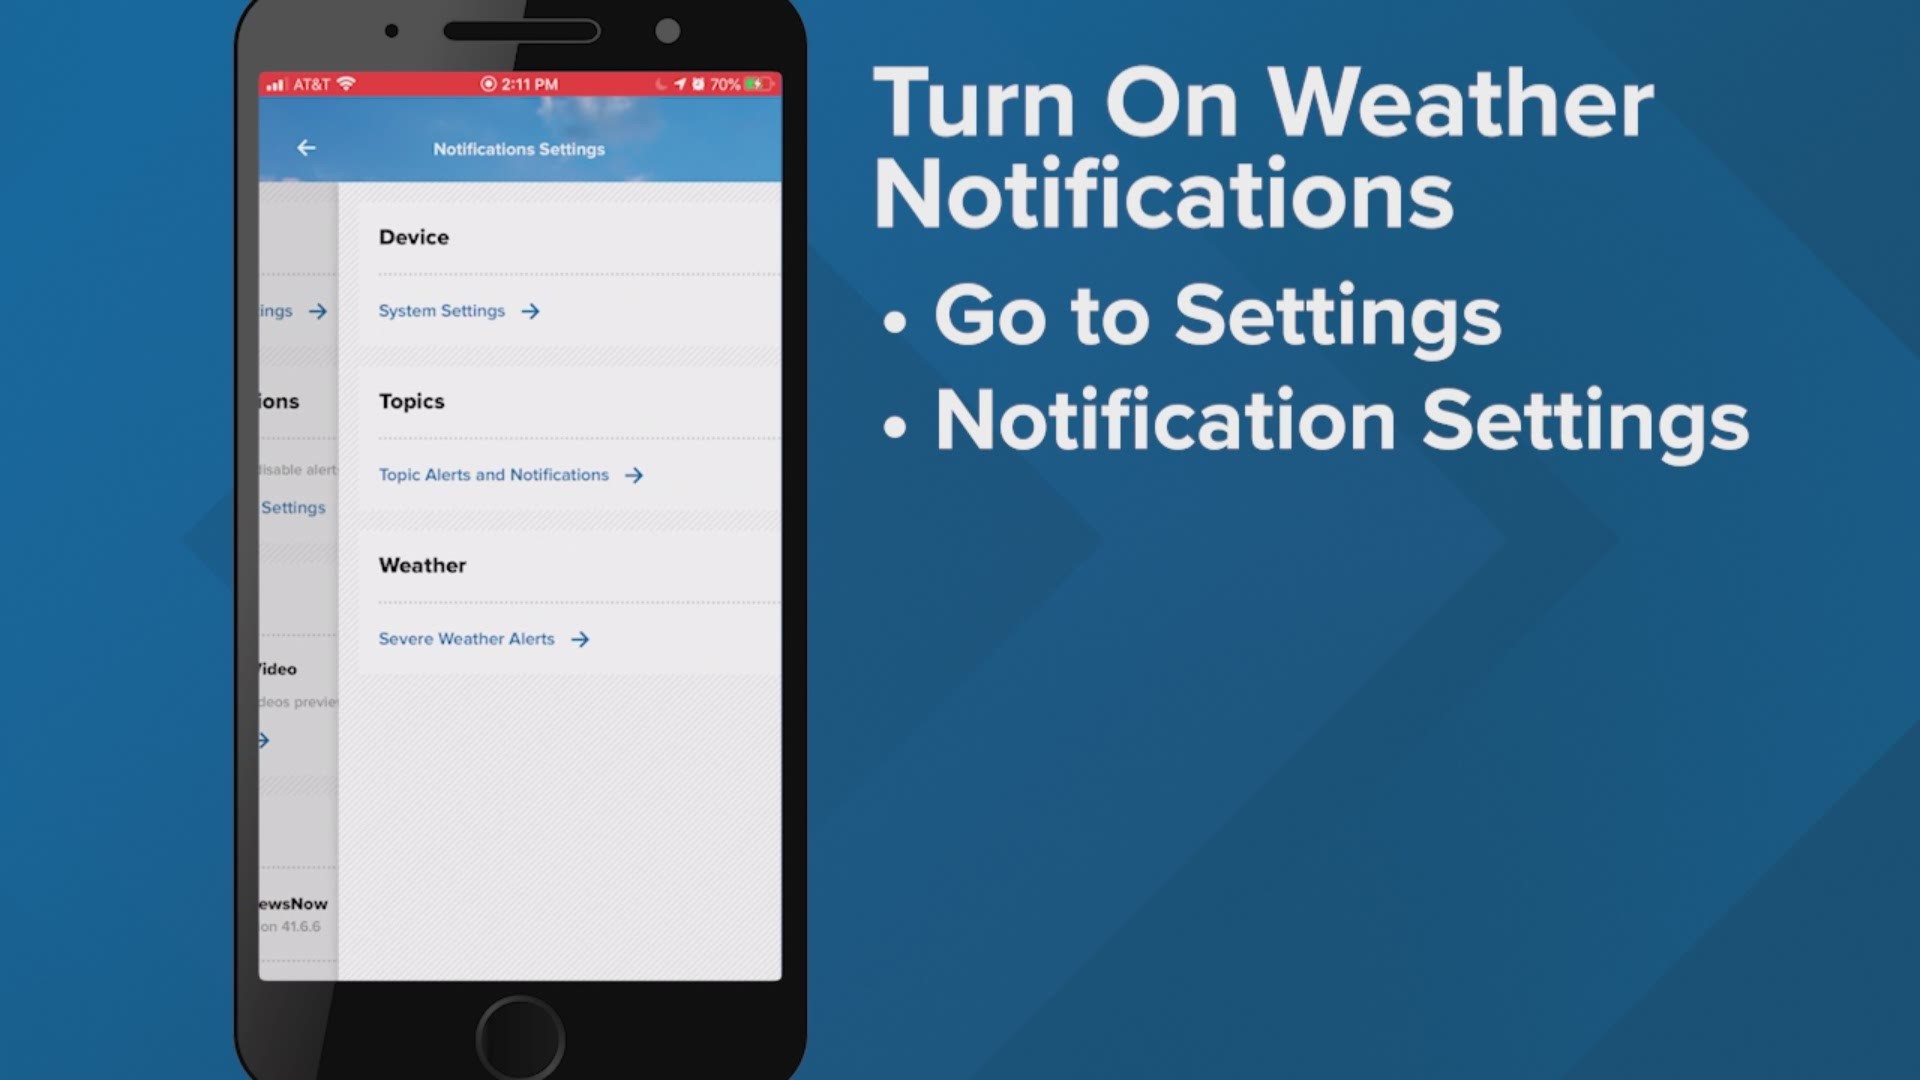 Whenever severe weather threatens Southeast Texas the 12NewsNow App can let you know and help keep you informed and safe.